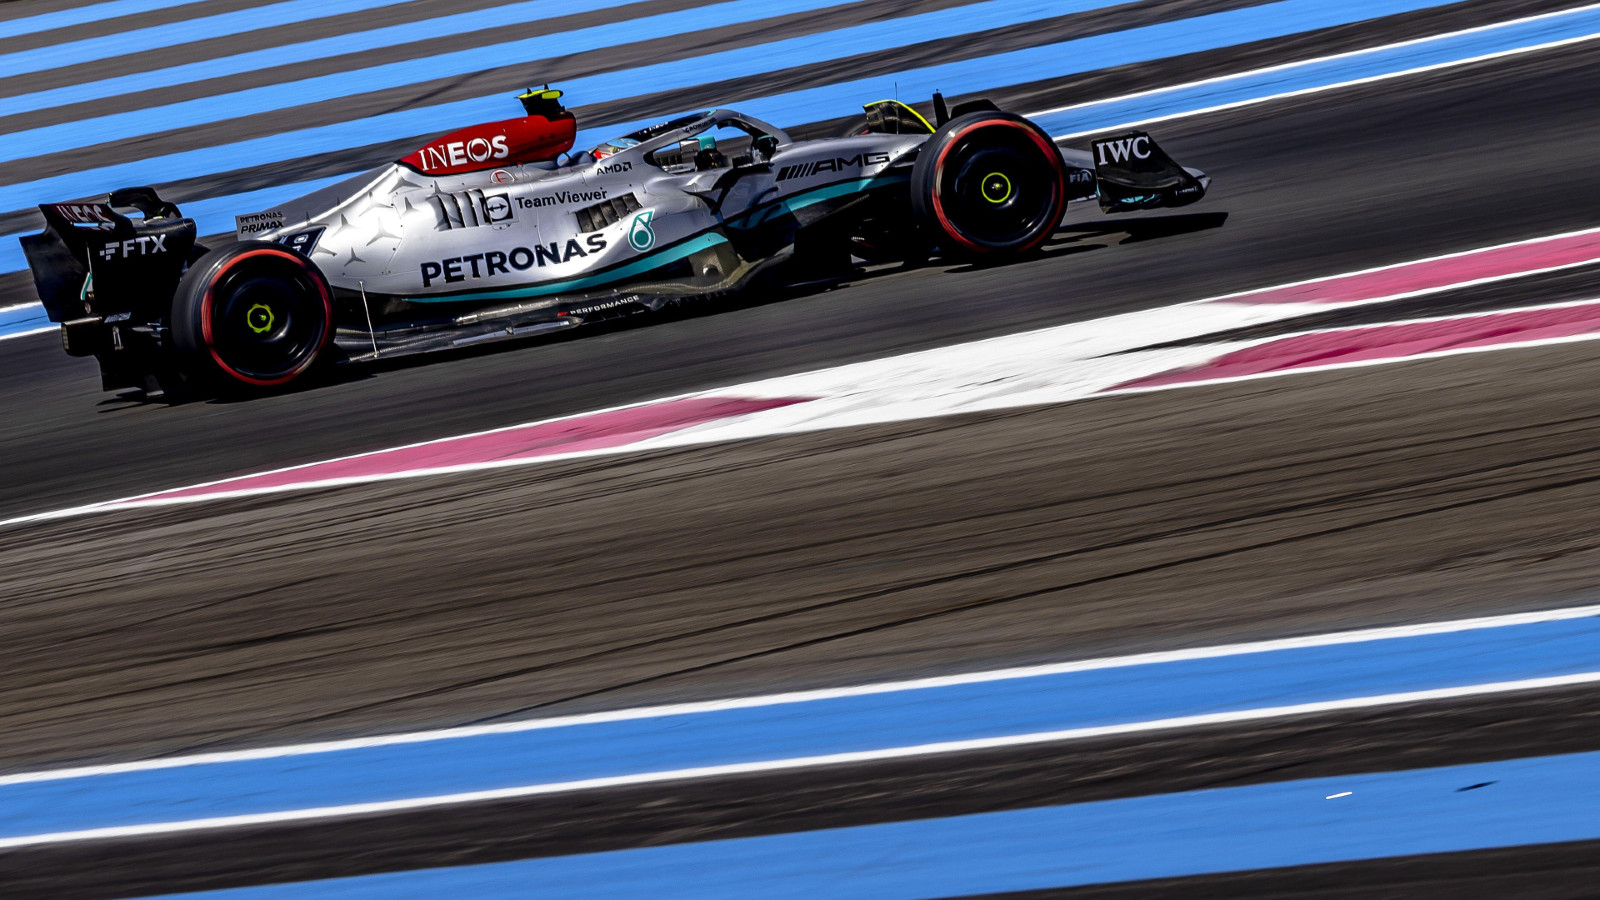 Mercedes' junior driver Nyck de Vries on track at the French Grand Prix. Paul Ricard, July 2022.